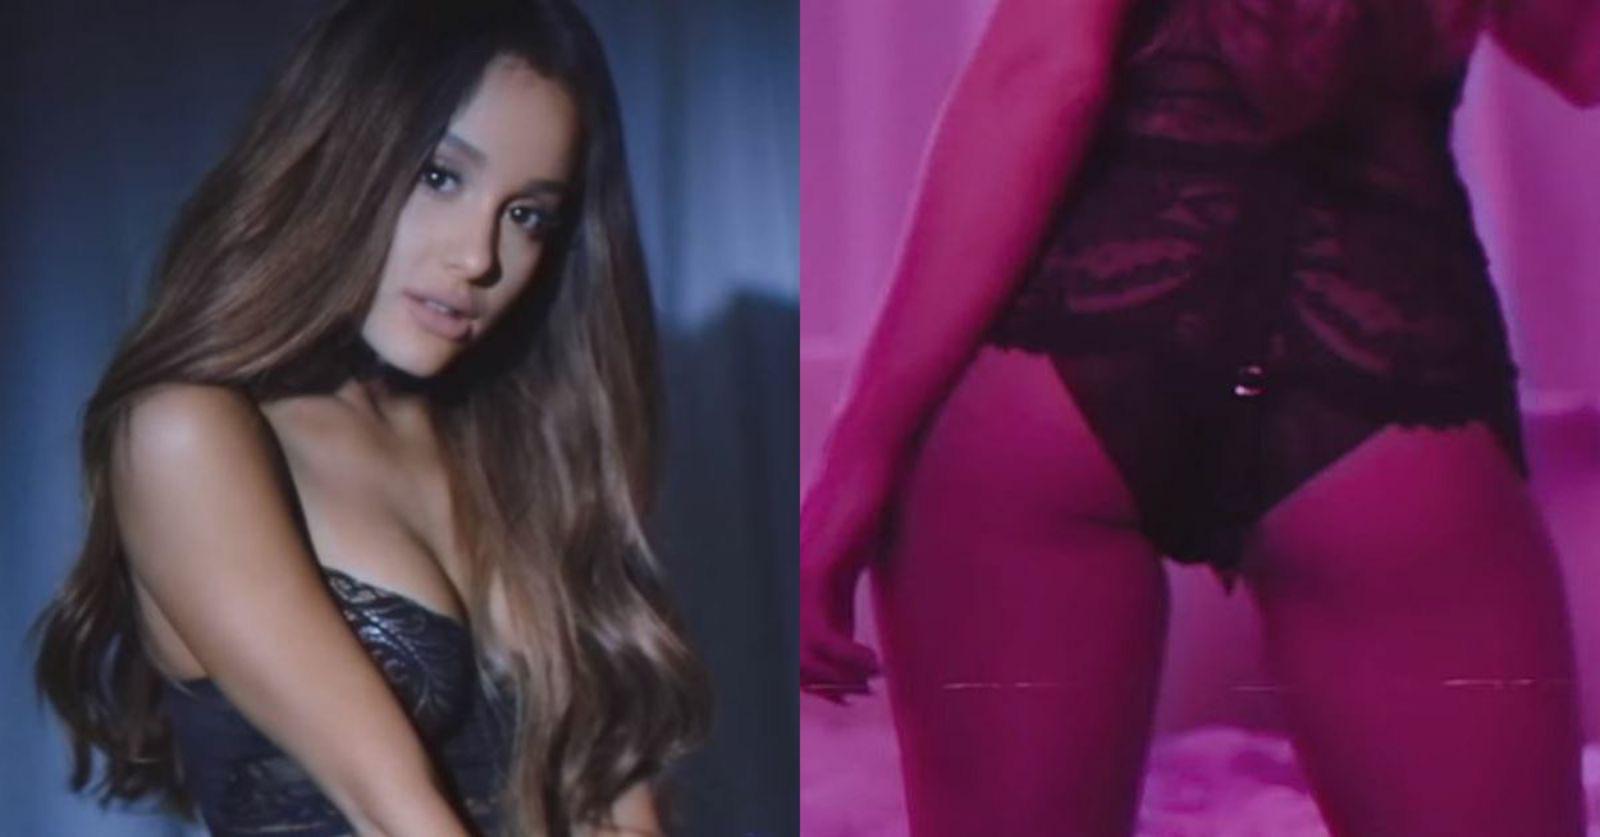 Ariana Grande can do whatever she wants to me